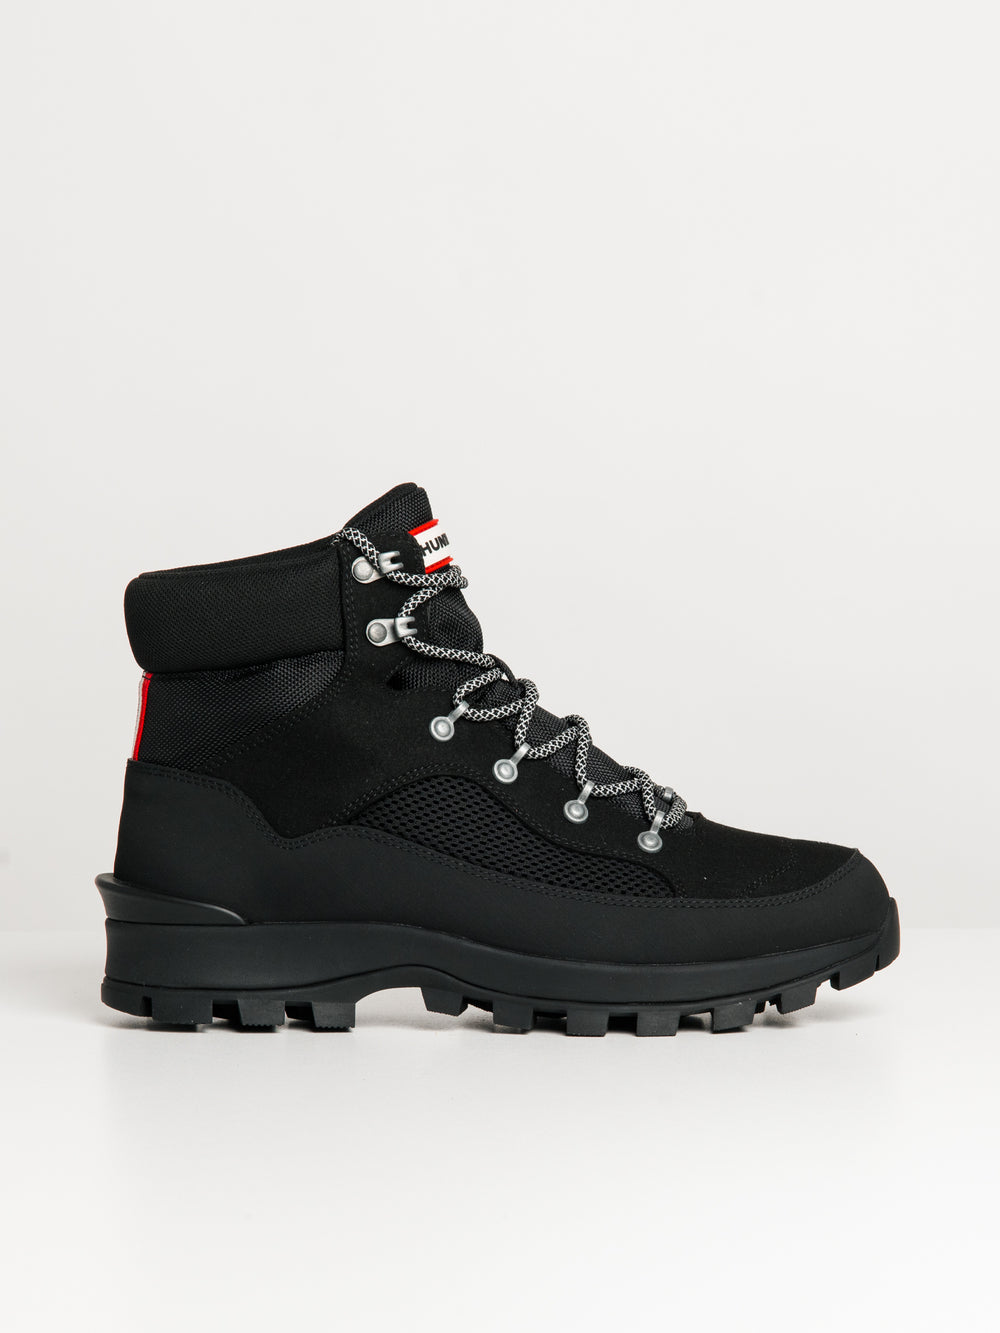 MENS HUNTER EXPLORER MID LACE BOOT - CLEARANCE